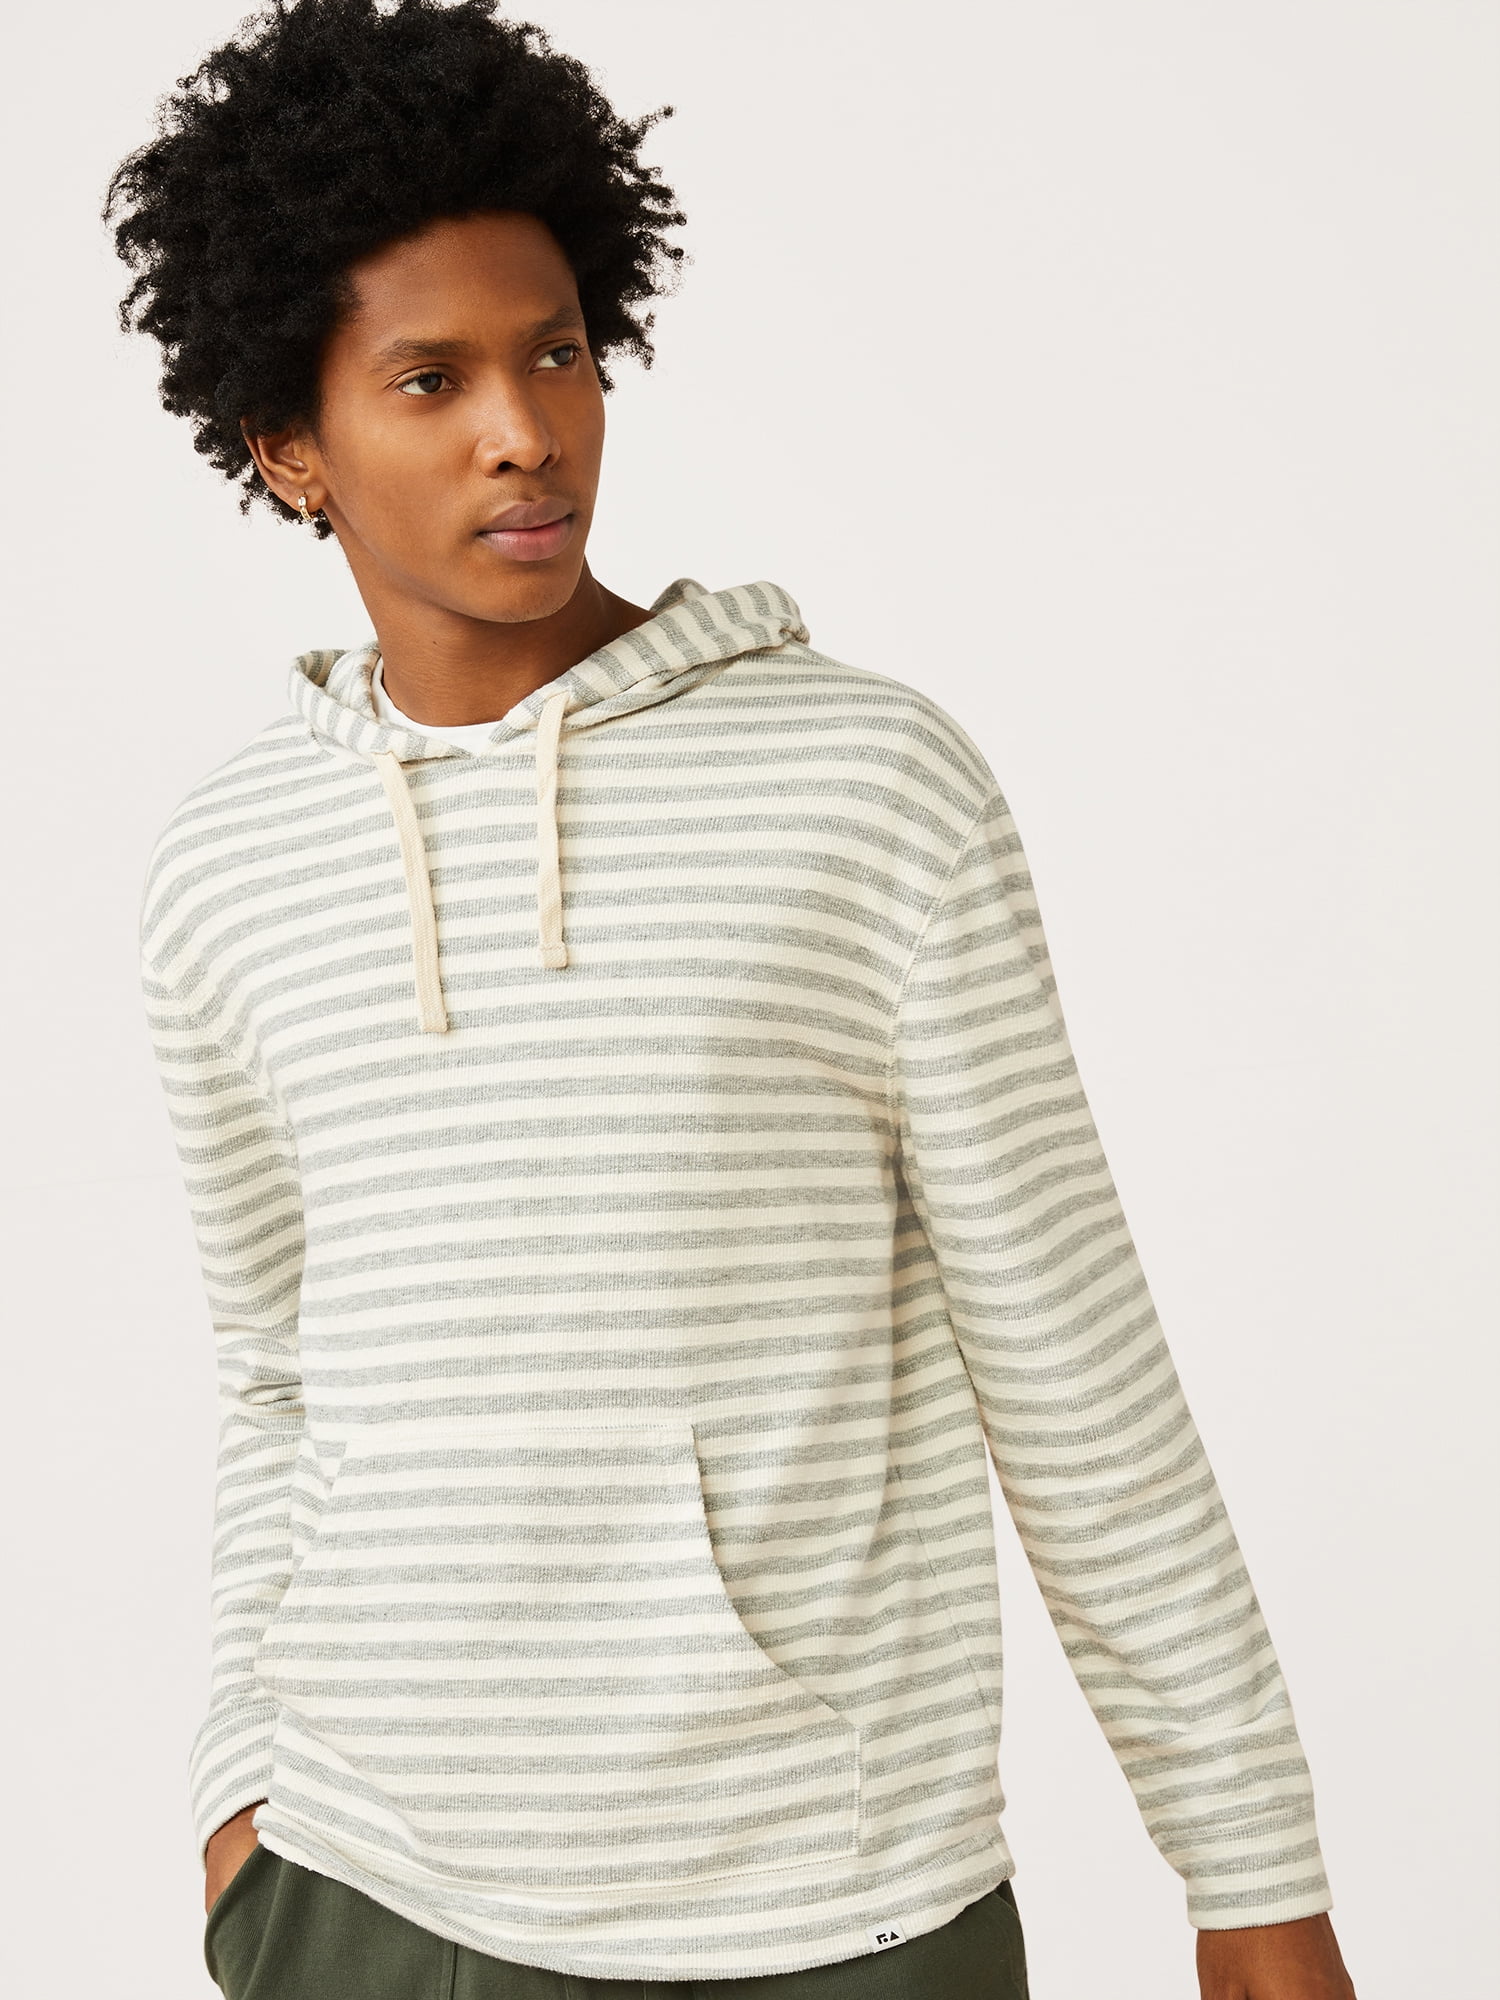 Freely Mens Plus Size Stitch Stripes Printed Leisure Pullover Sweatshirt Top 